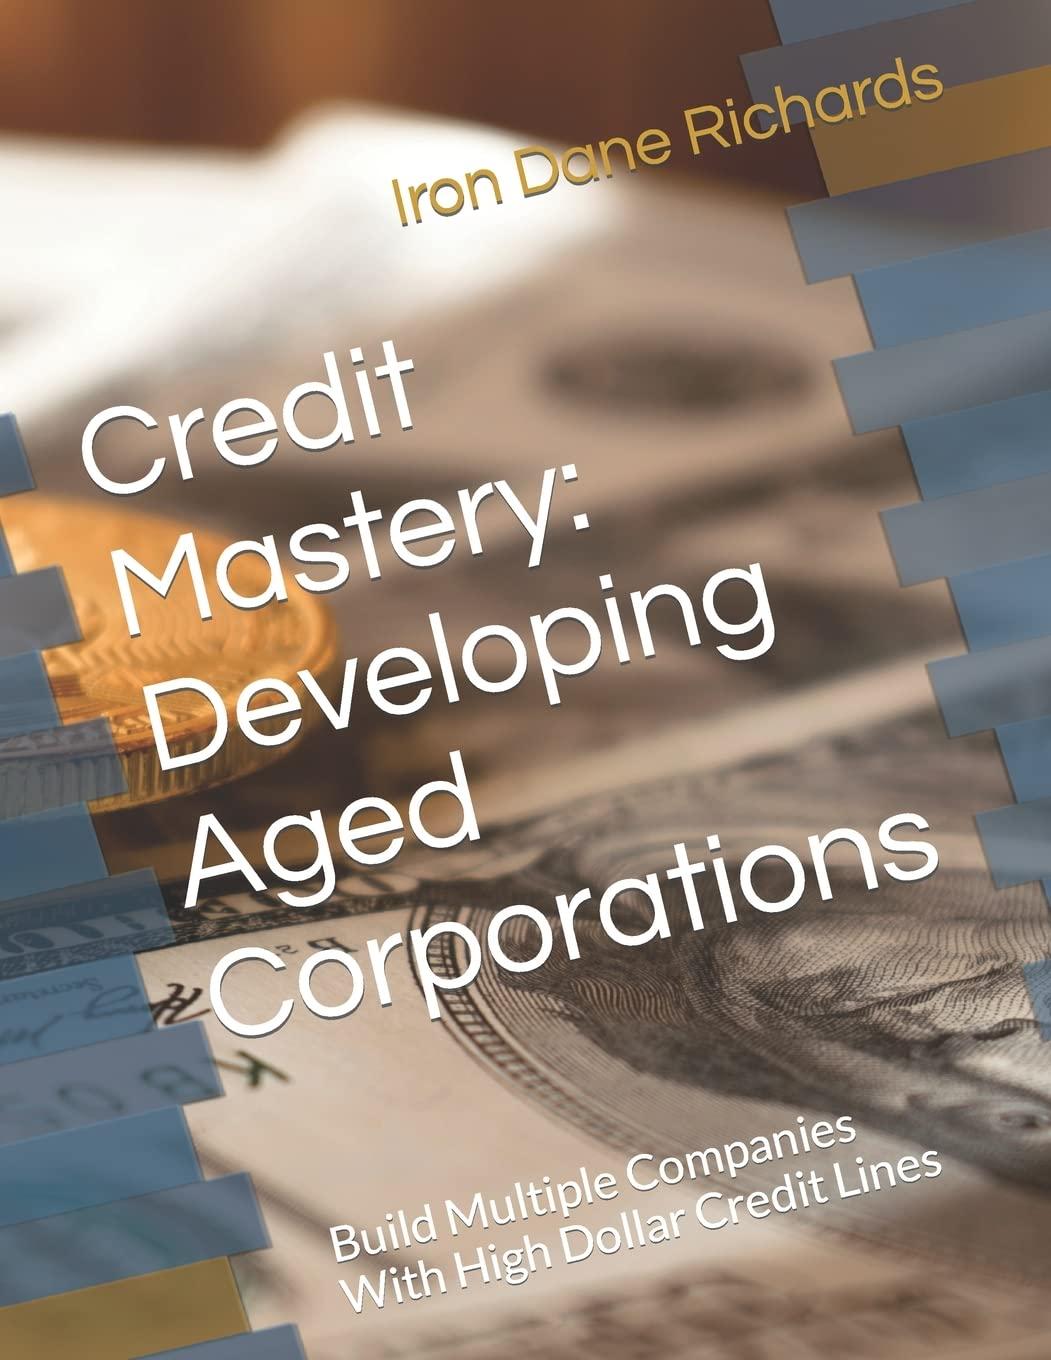 Credit Mastery Developing Aged Corporations Build Multiple Companies With High Dollar Credit Lines